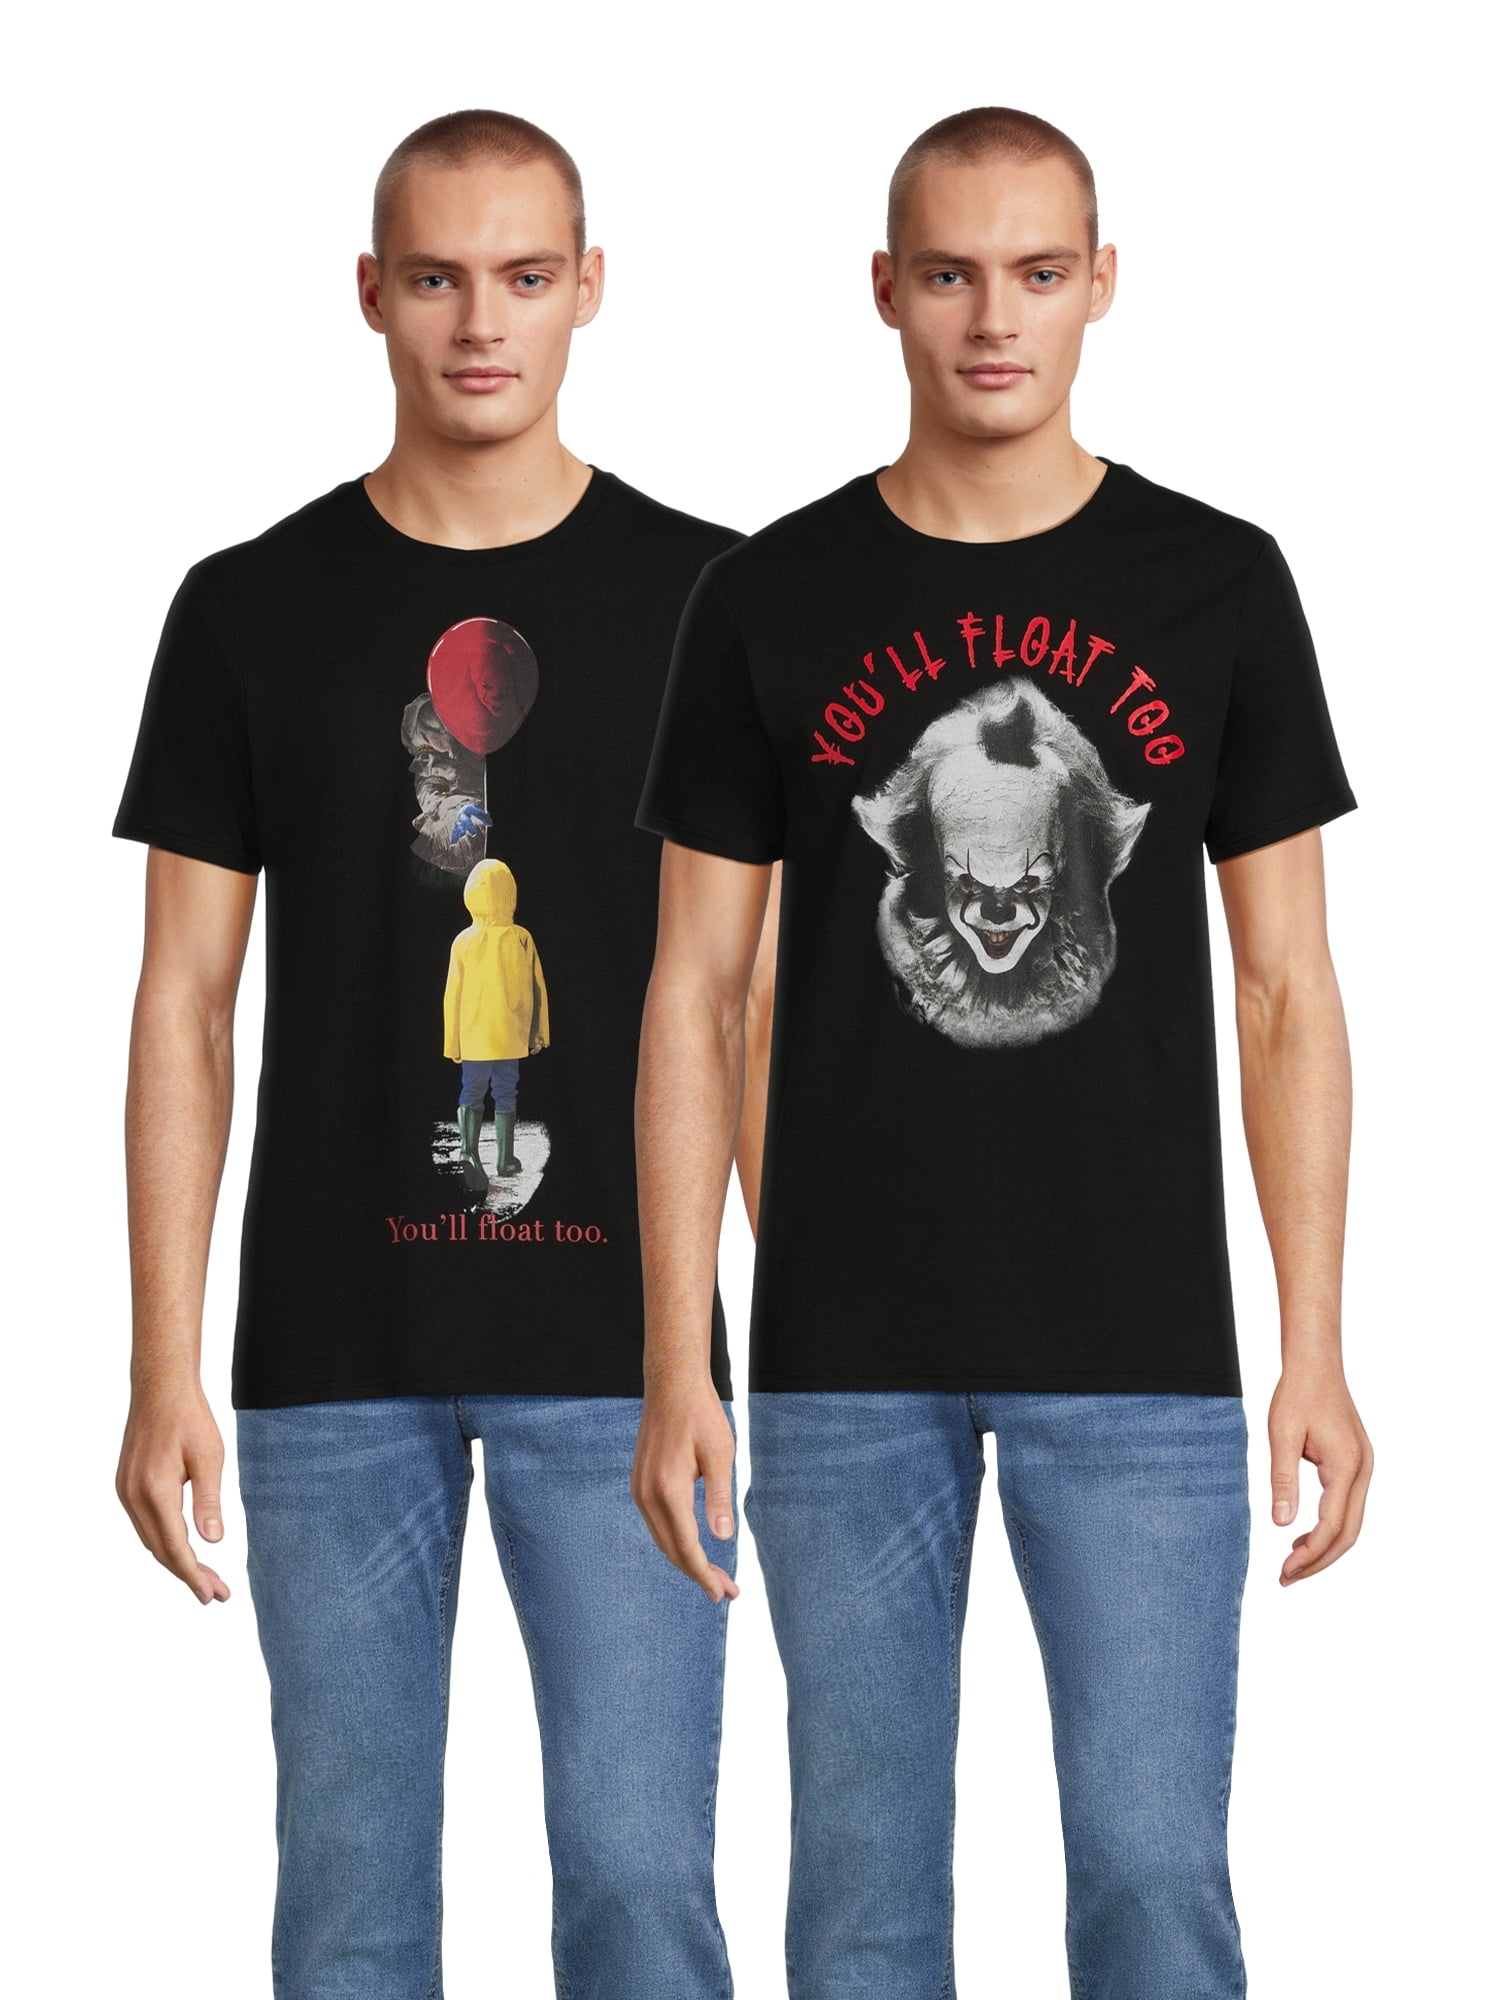 Halloween Clown Sizes Men\'s Big Graphic King 2-Pack, It Men\'s Pennywise and Stephen Tees, S-3XL